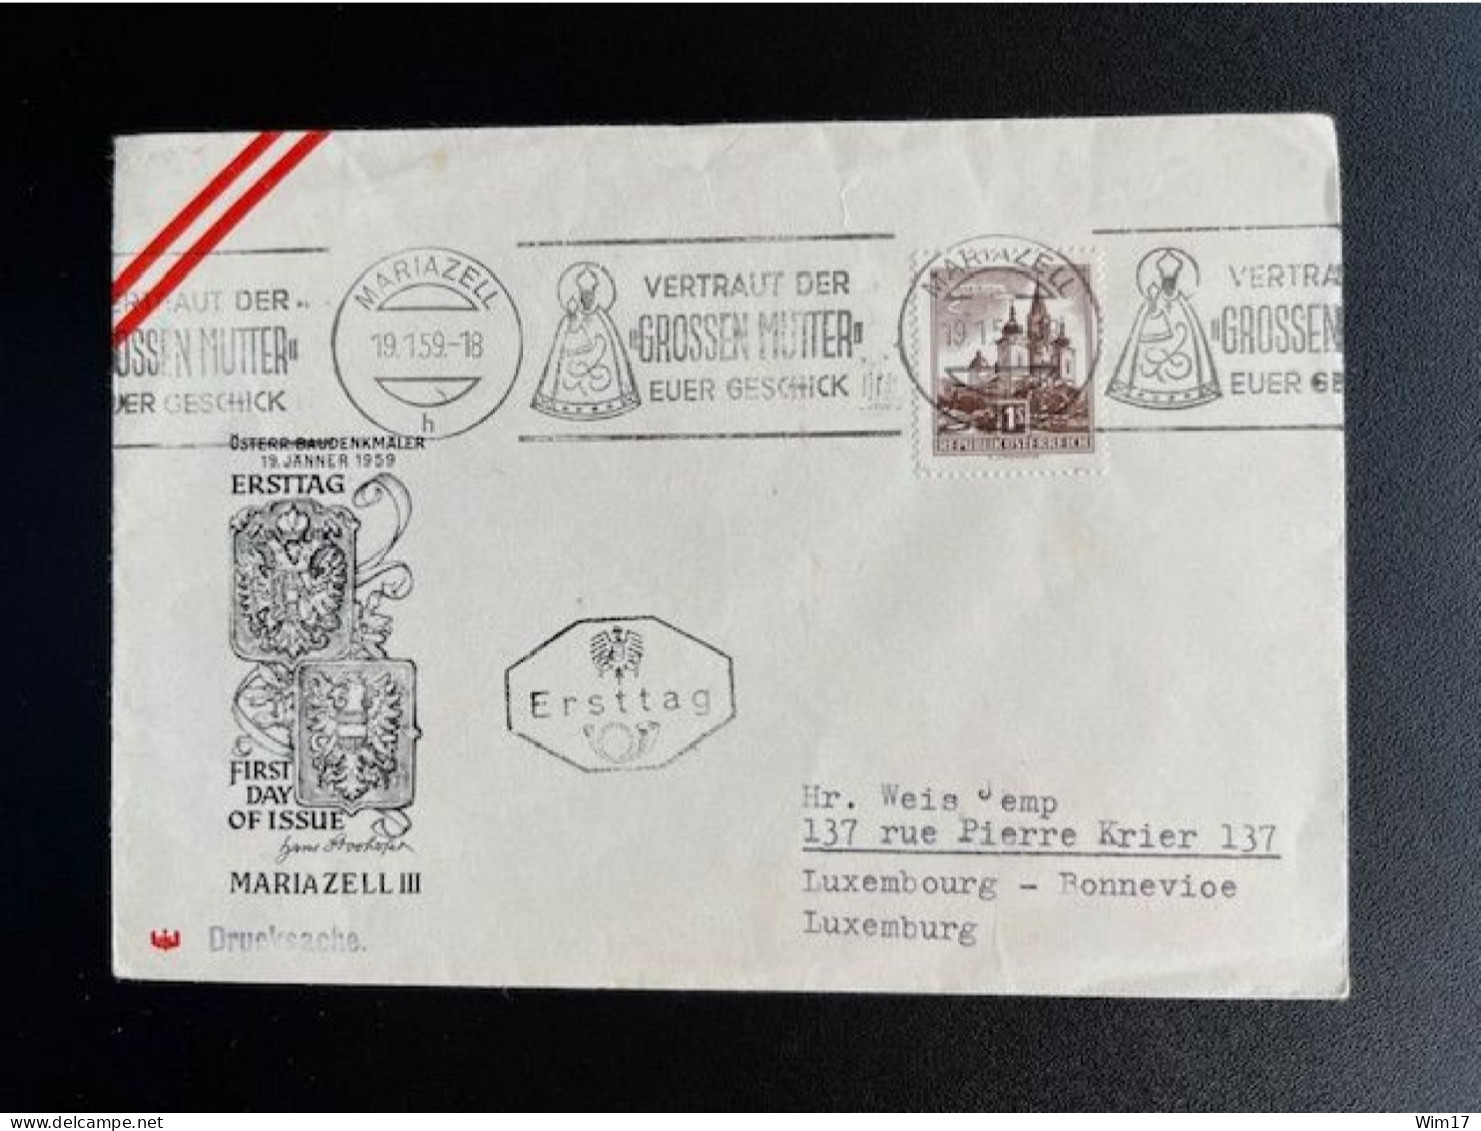 AUSTRIA 1959 LETTER MARIAZELL TO LUXEMBOURG 19-01-1959 OOSTENRIJK OSTERREICH FDC - Lettres & Documents